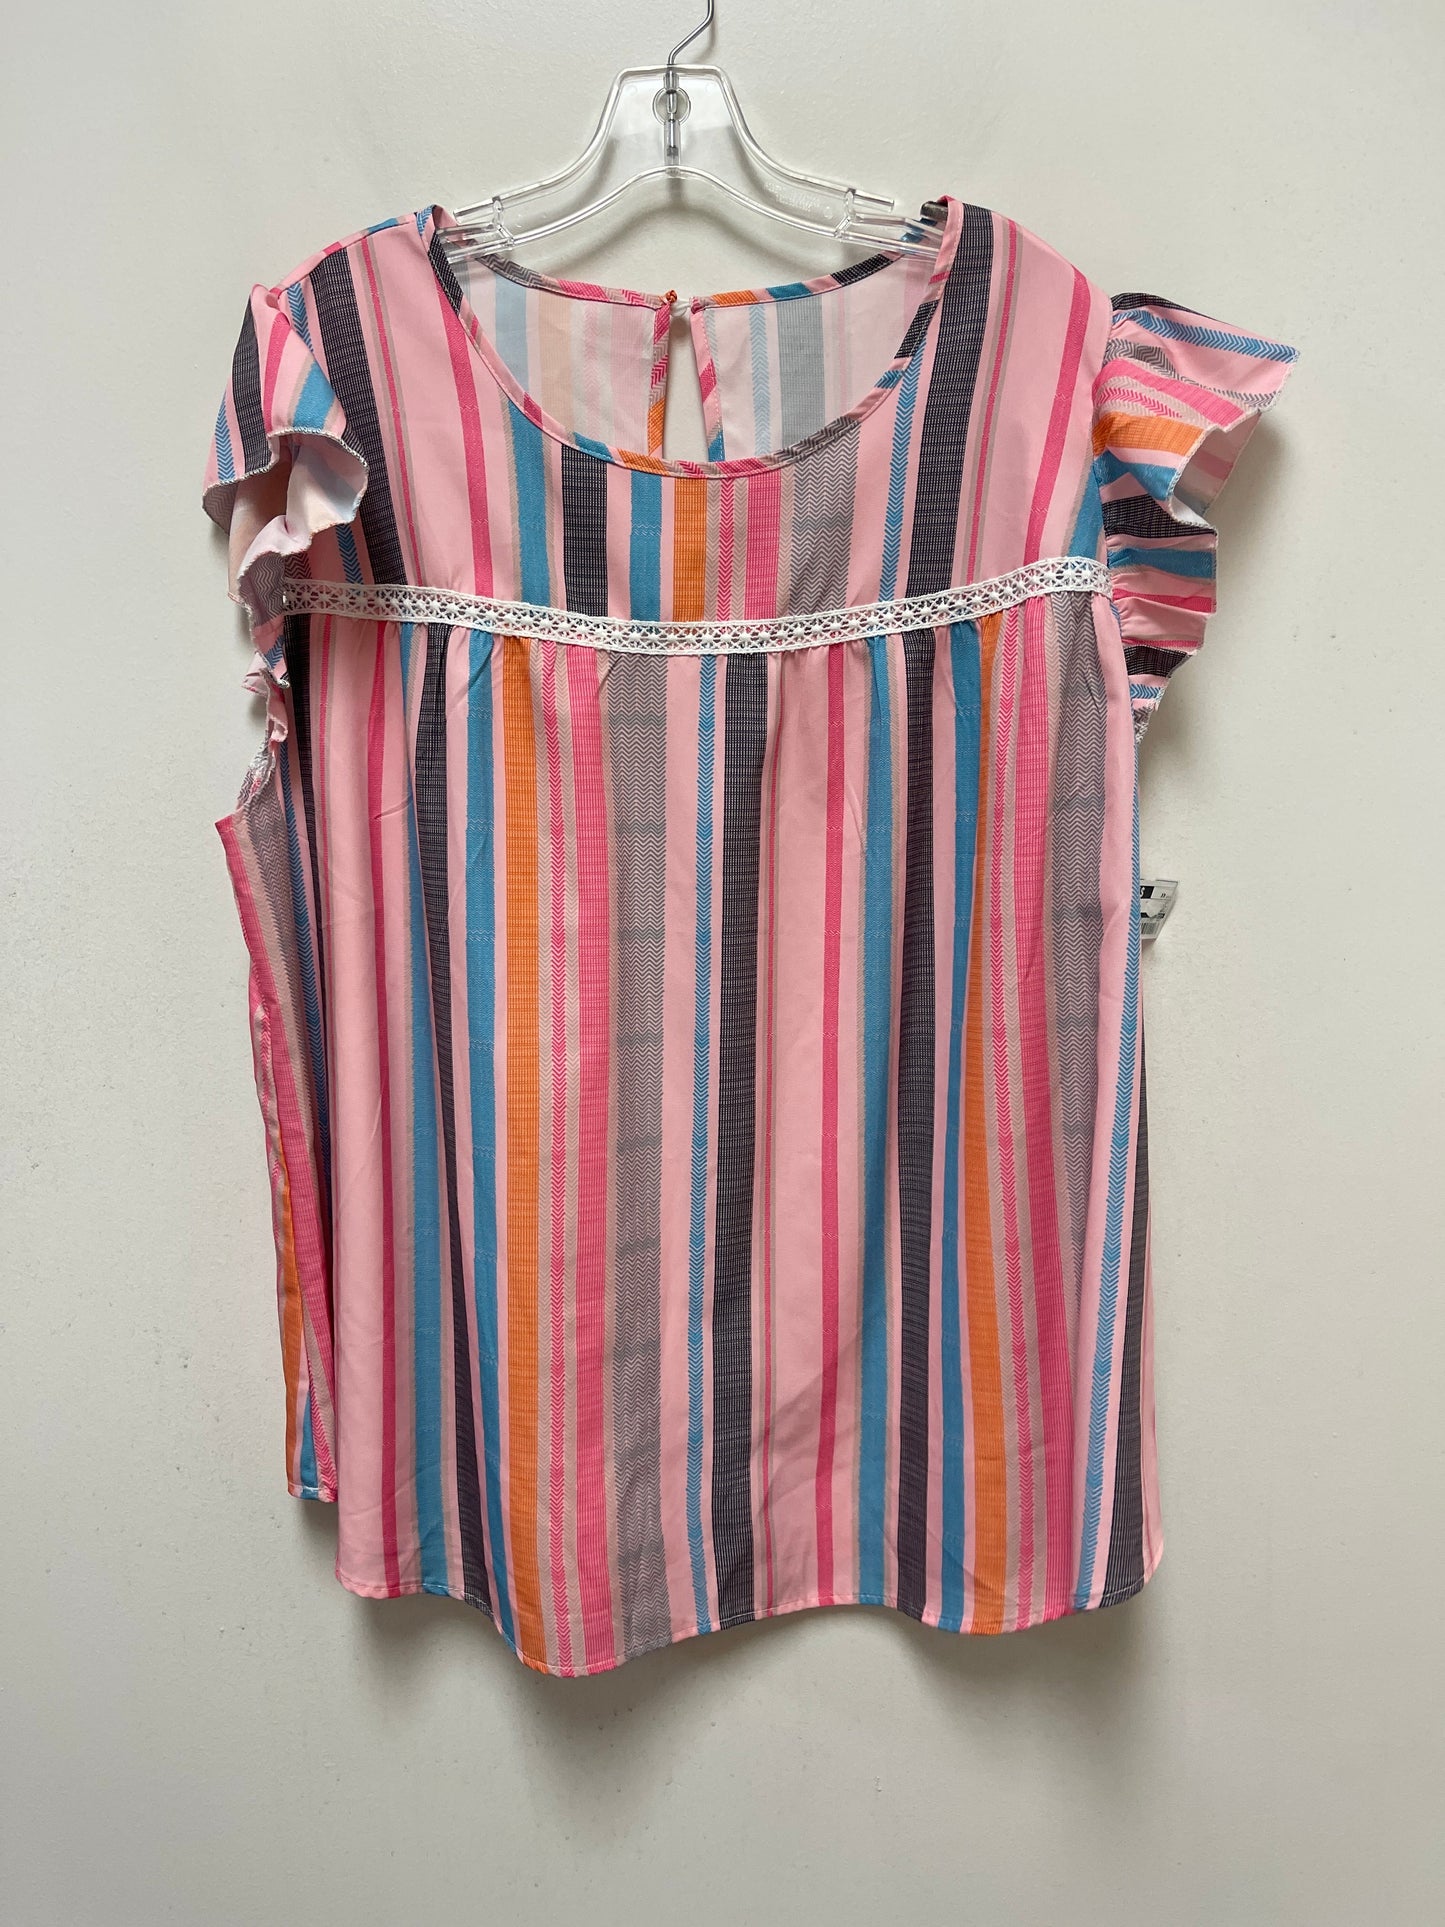 Multi-colored Top Short Sleeve Shein, Size 4x